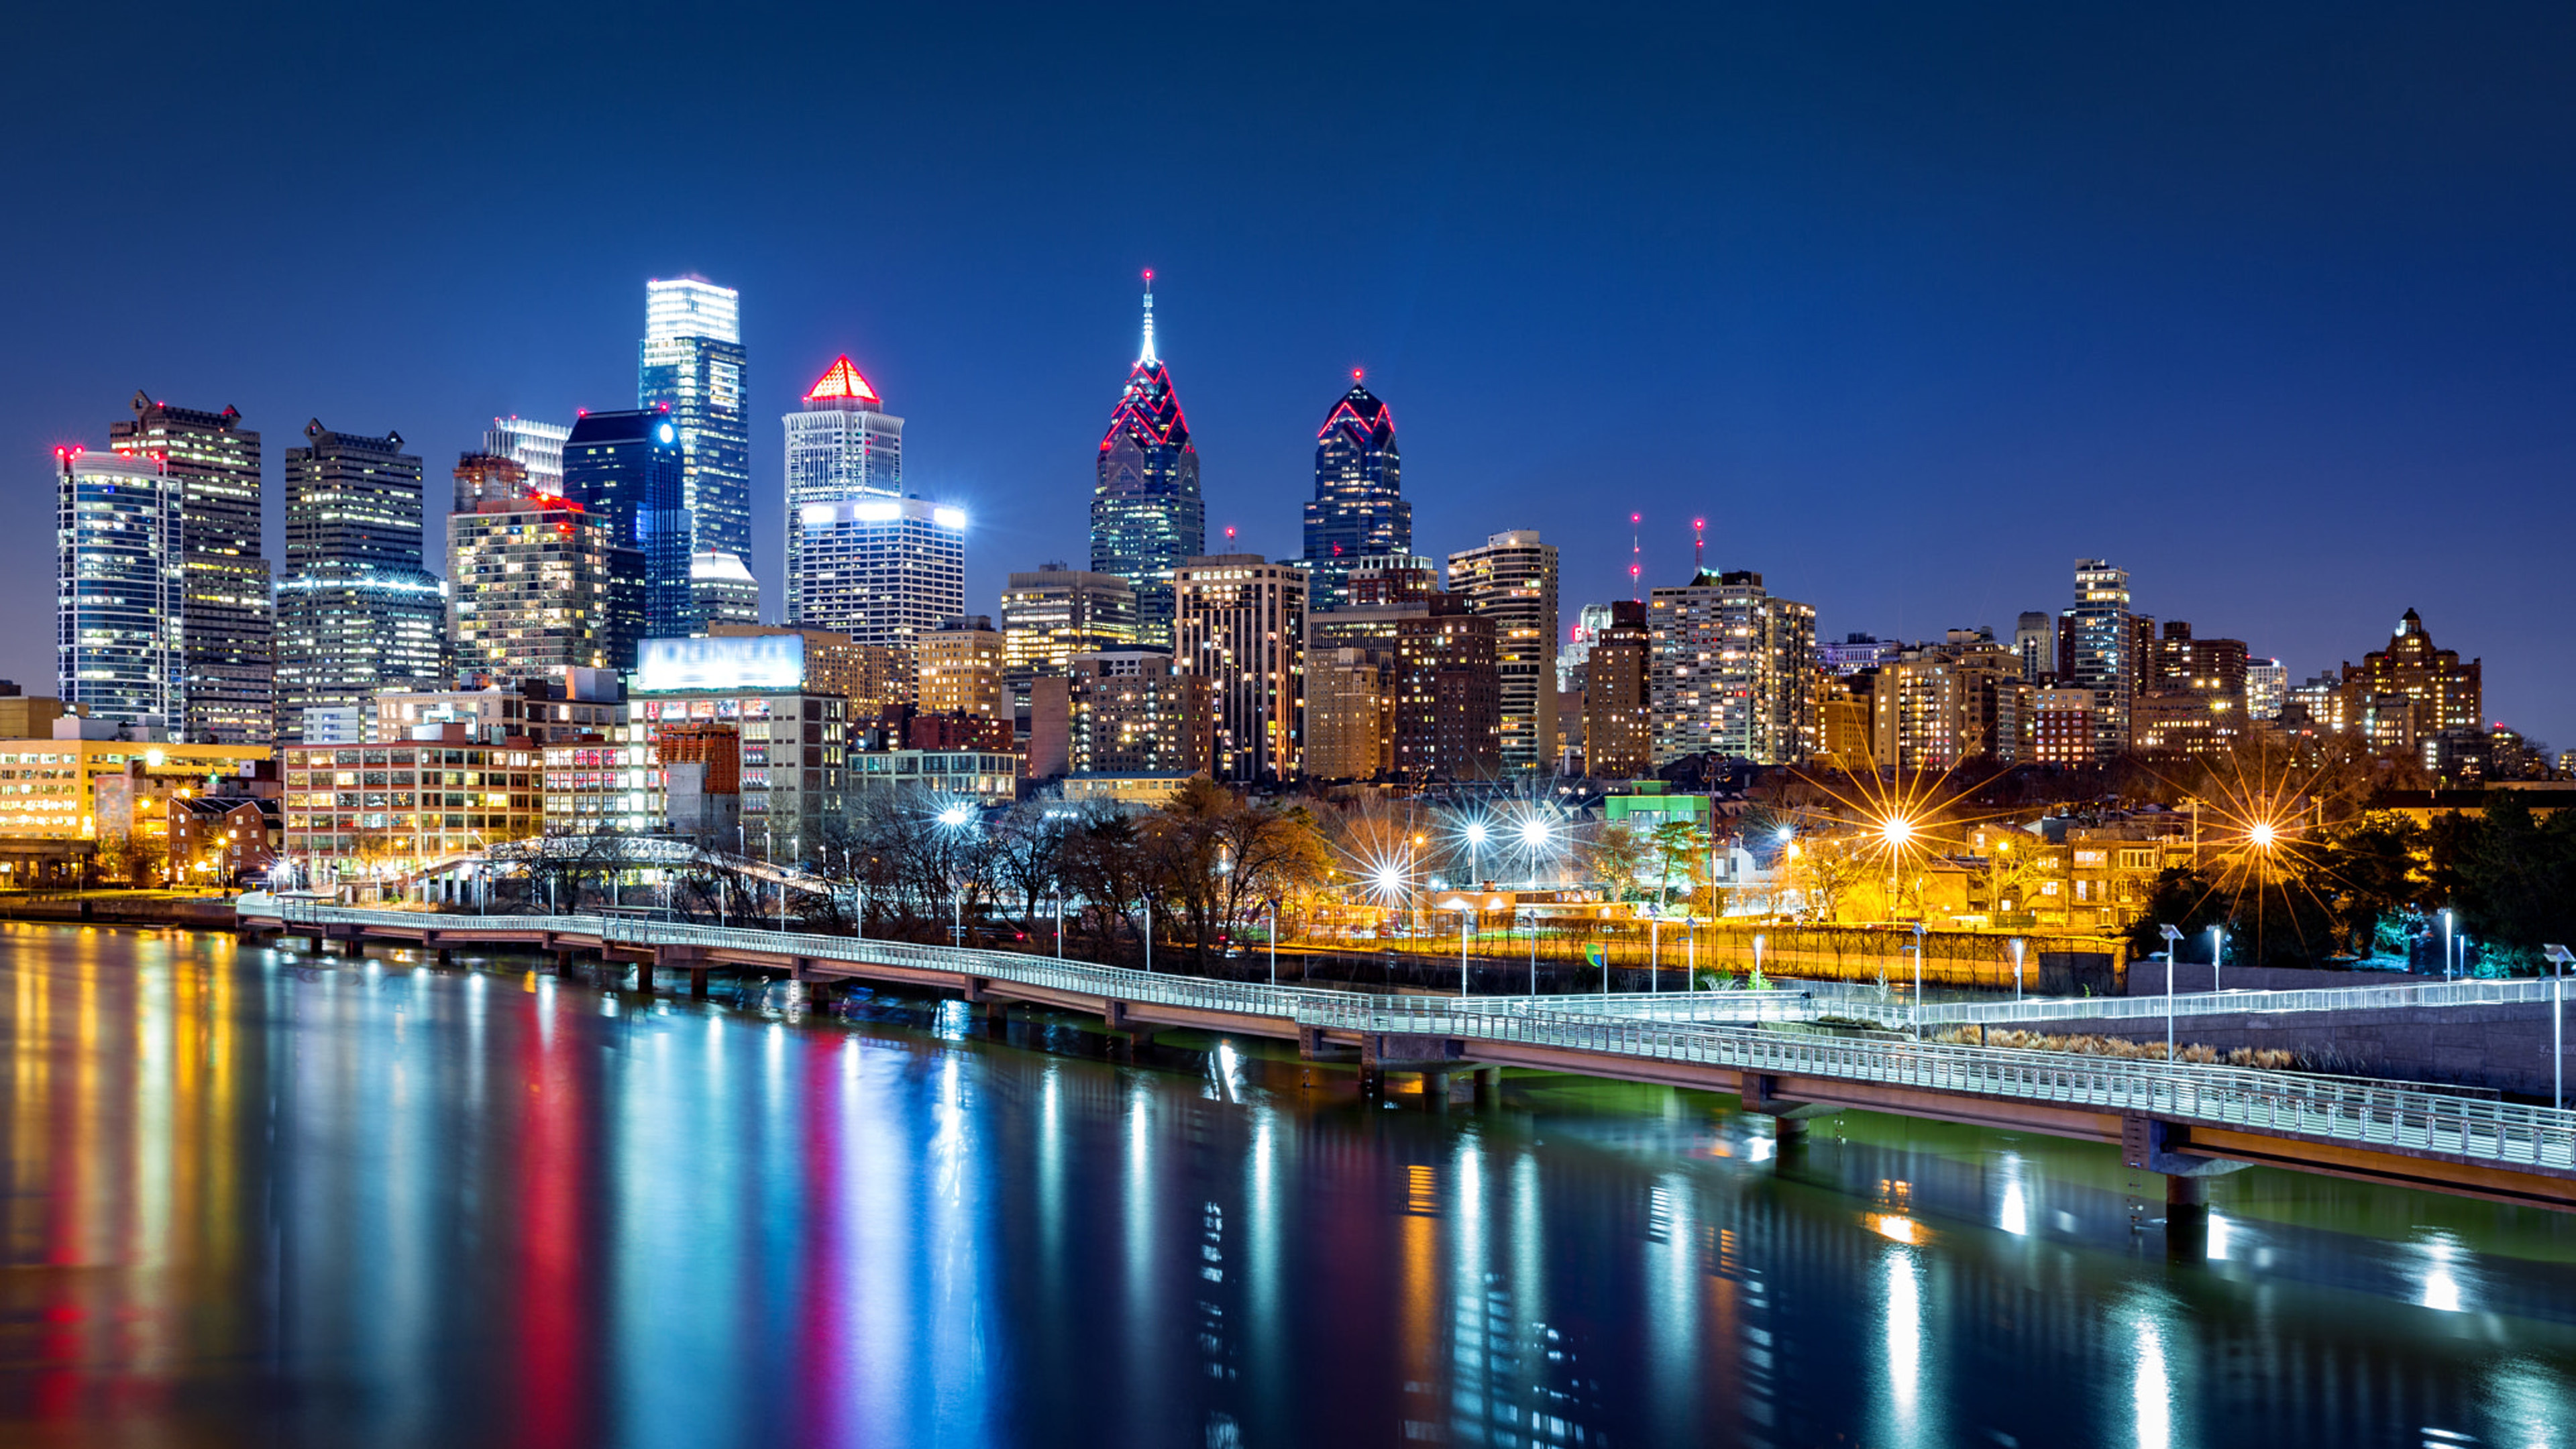 Philly Skyline, Cityscape at night, Android wallpapers, Ethan Johnson, 3840x2160 4K Desktop